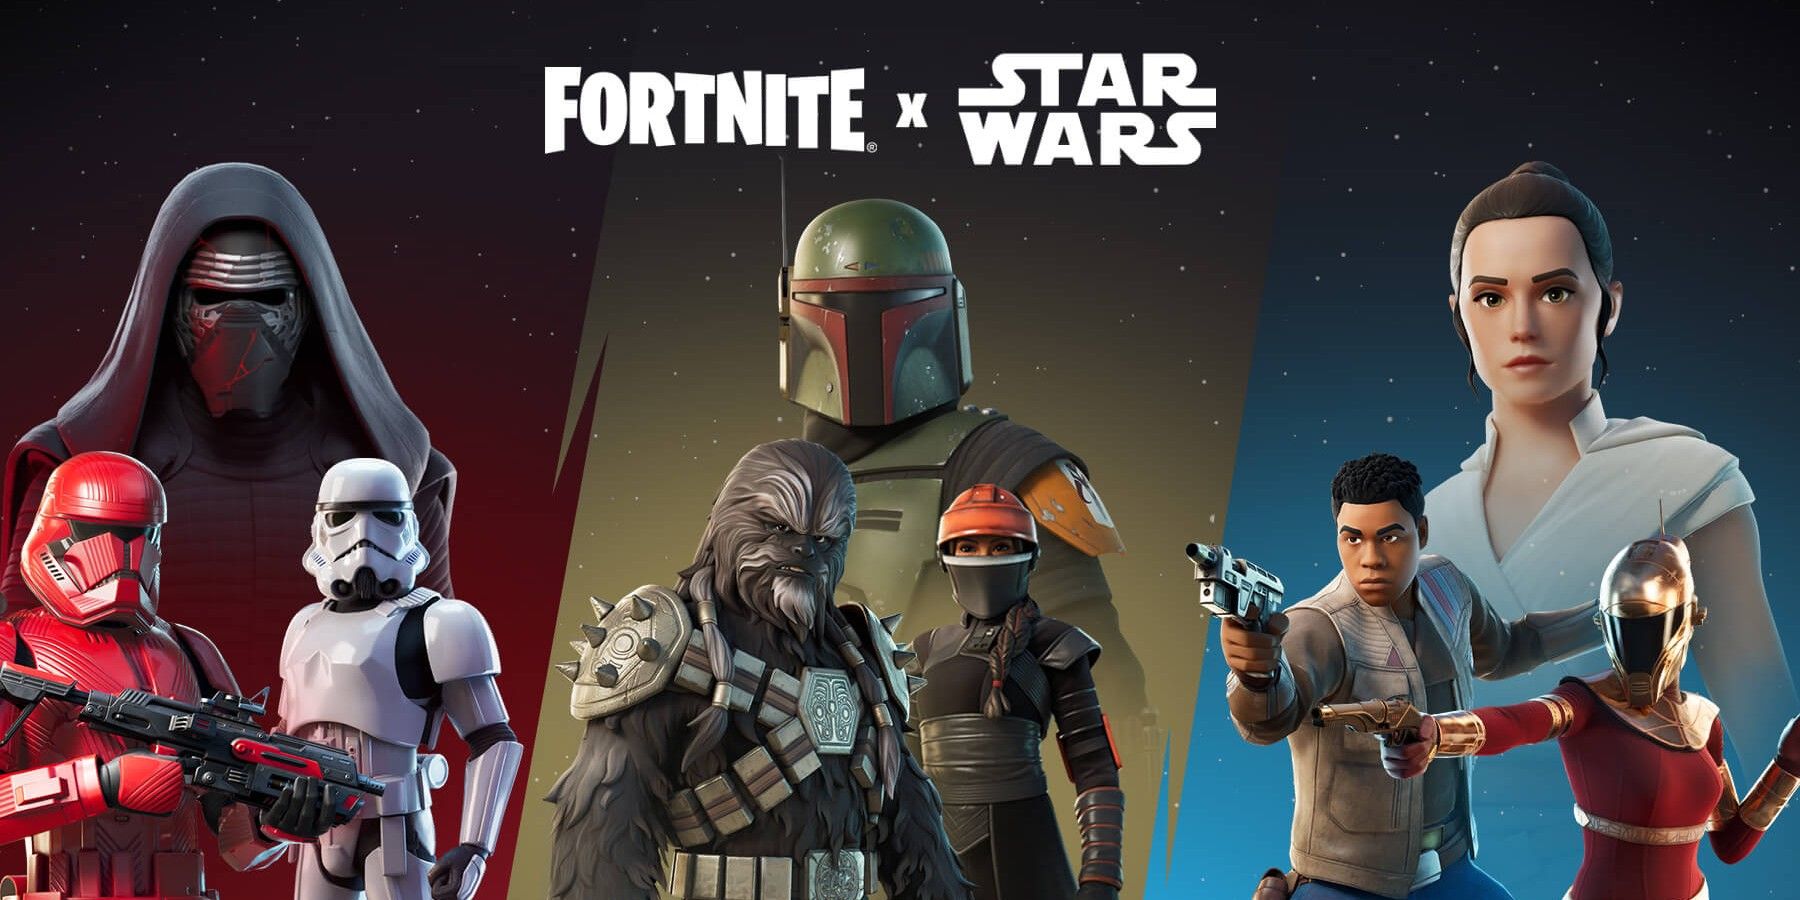 Limited Star Wars crossover costumes in Fortnite.